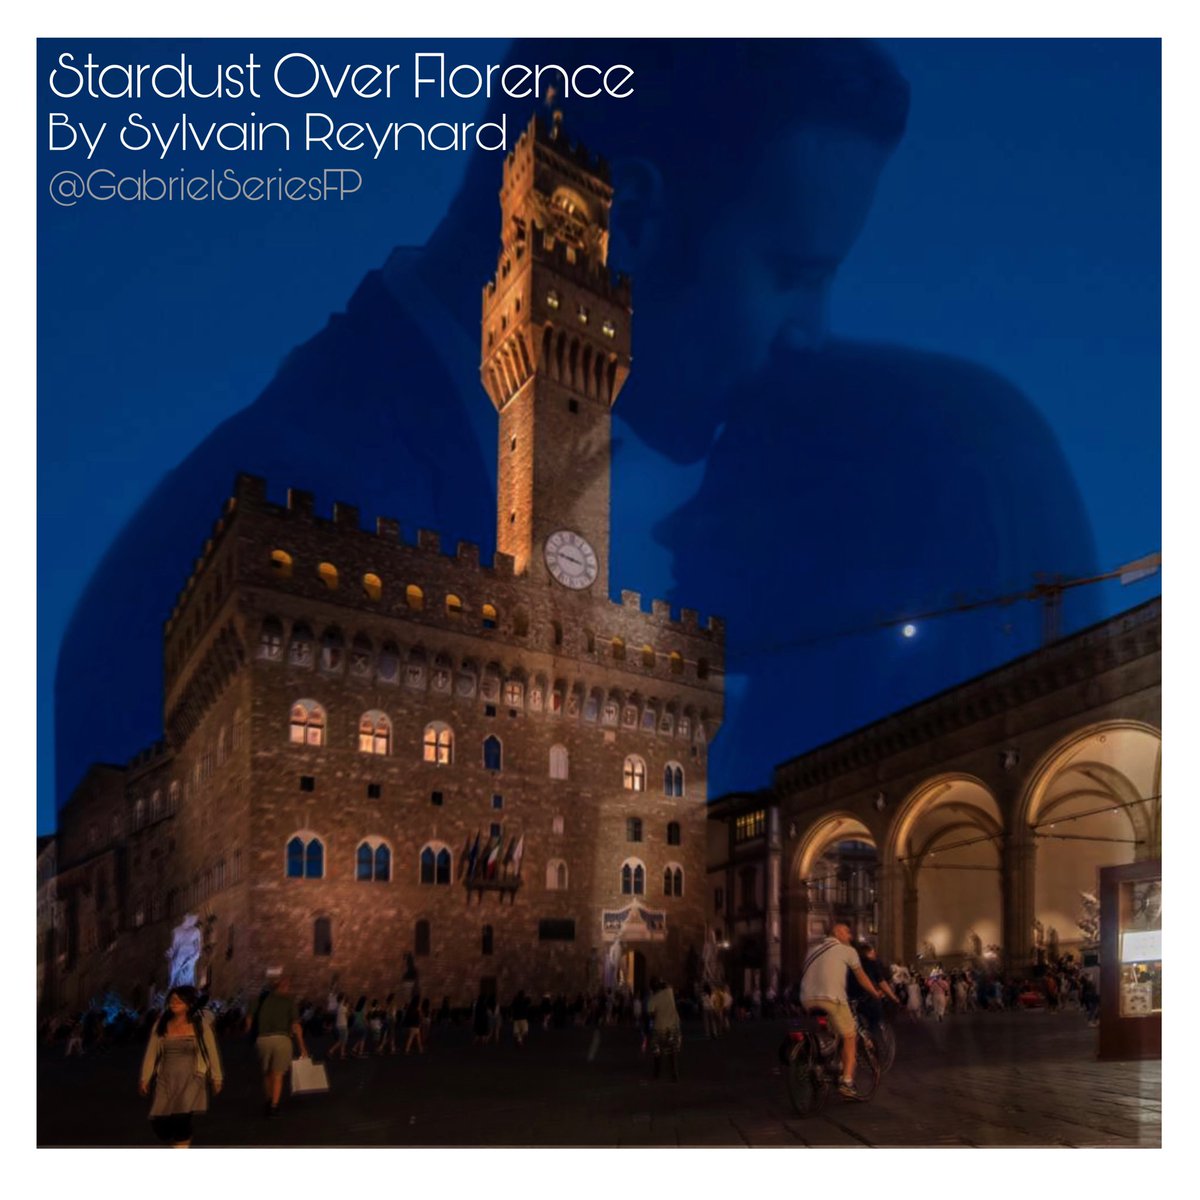 ICYMI: Our dear Boss, @sylvainreynard, shared a special outtake of Julia and Gabriel. Take a moment to enjoy #StardustOverFlorence ✨. fanfiction.net/s/13016272/1/S…